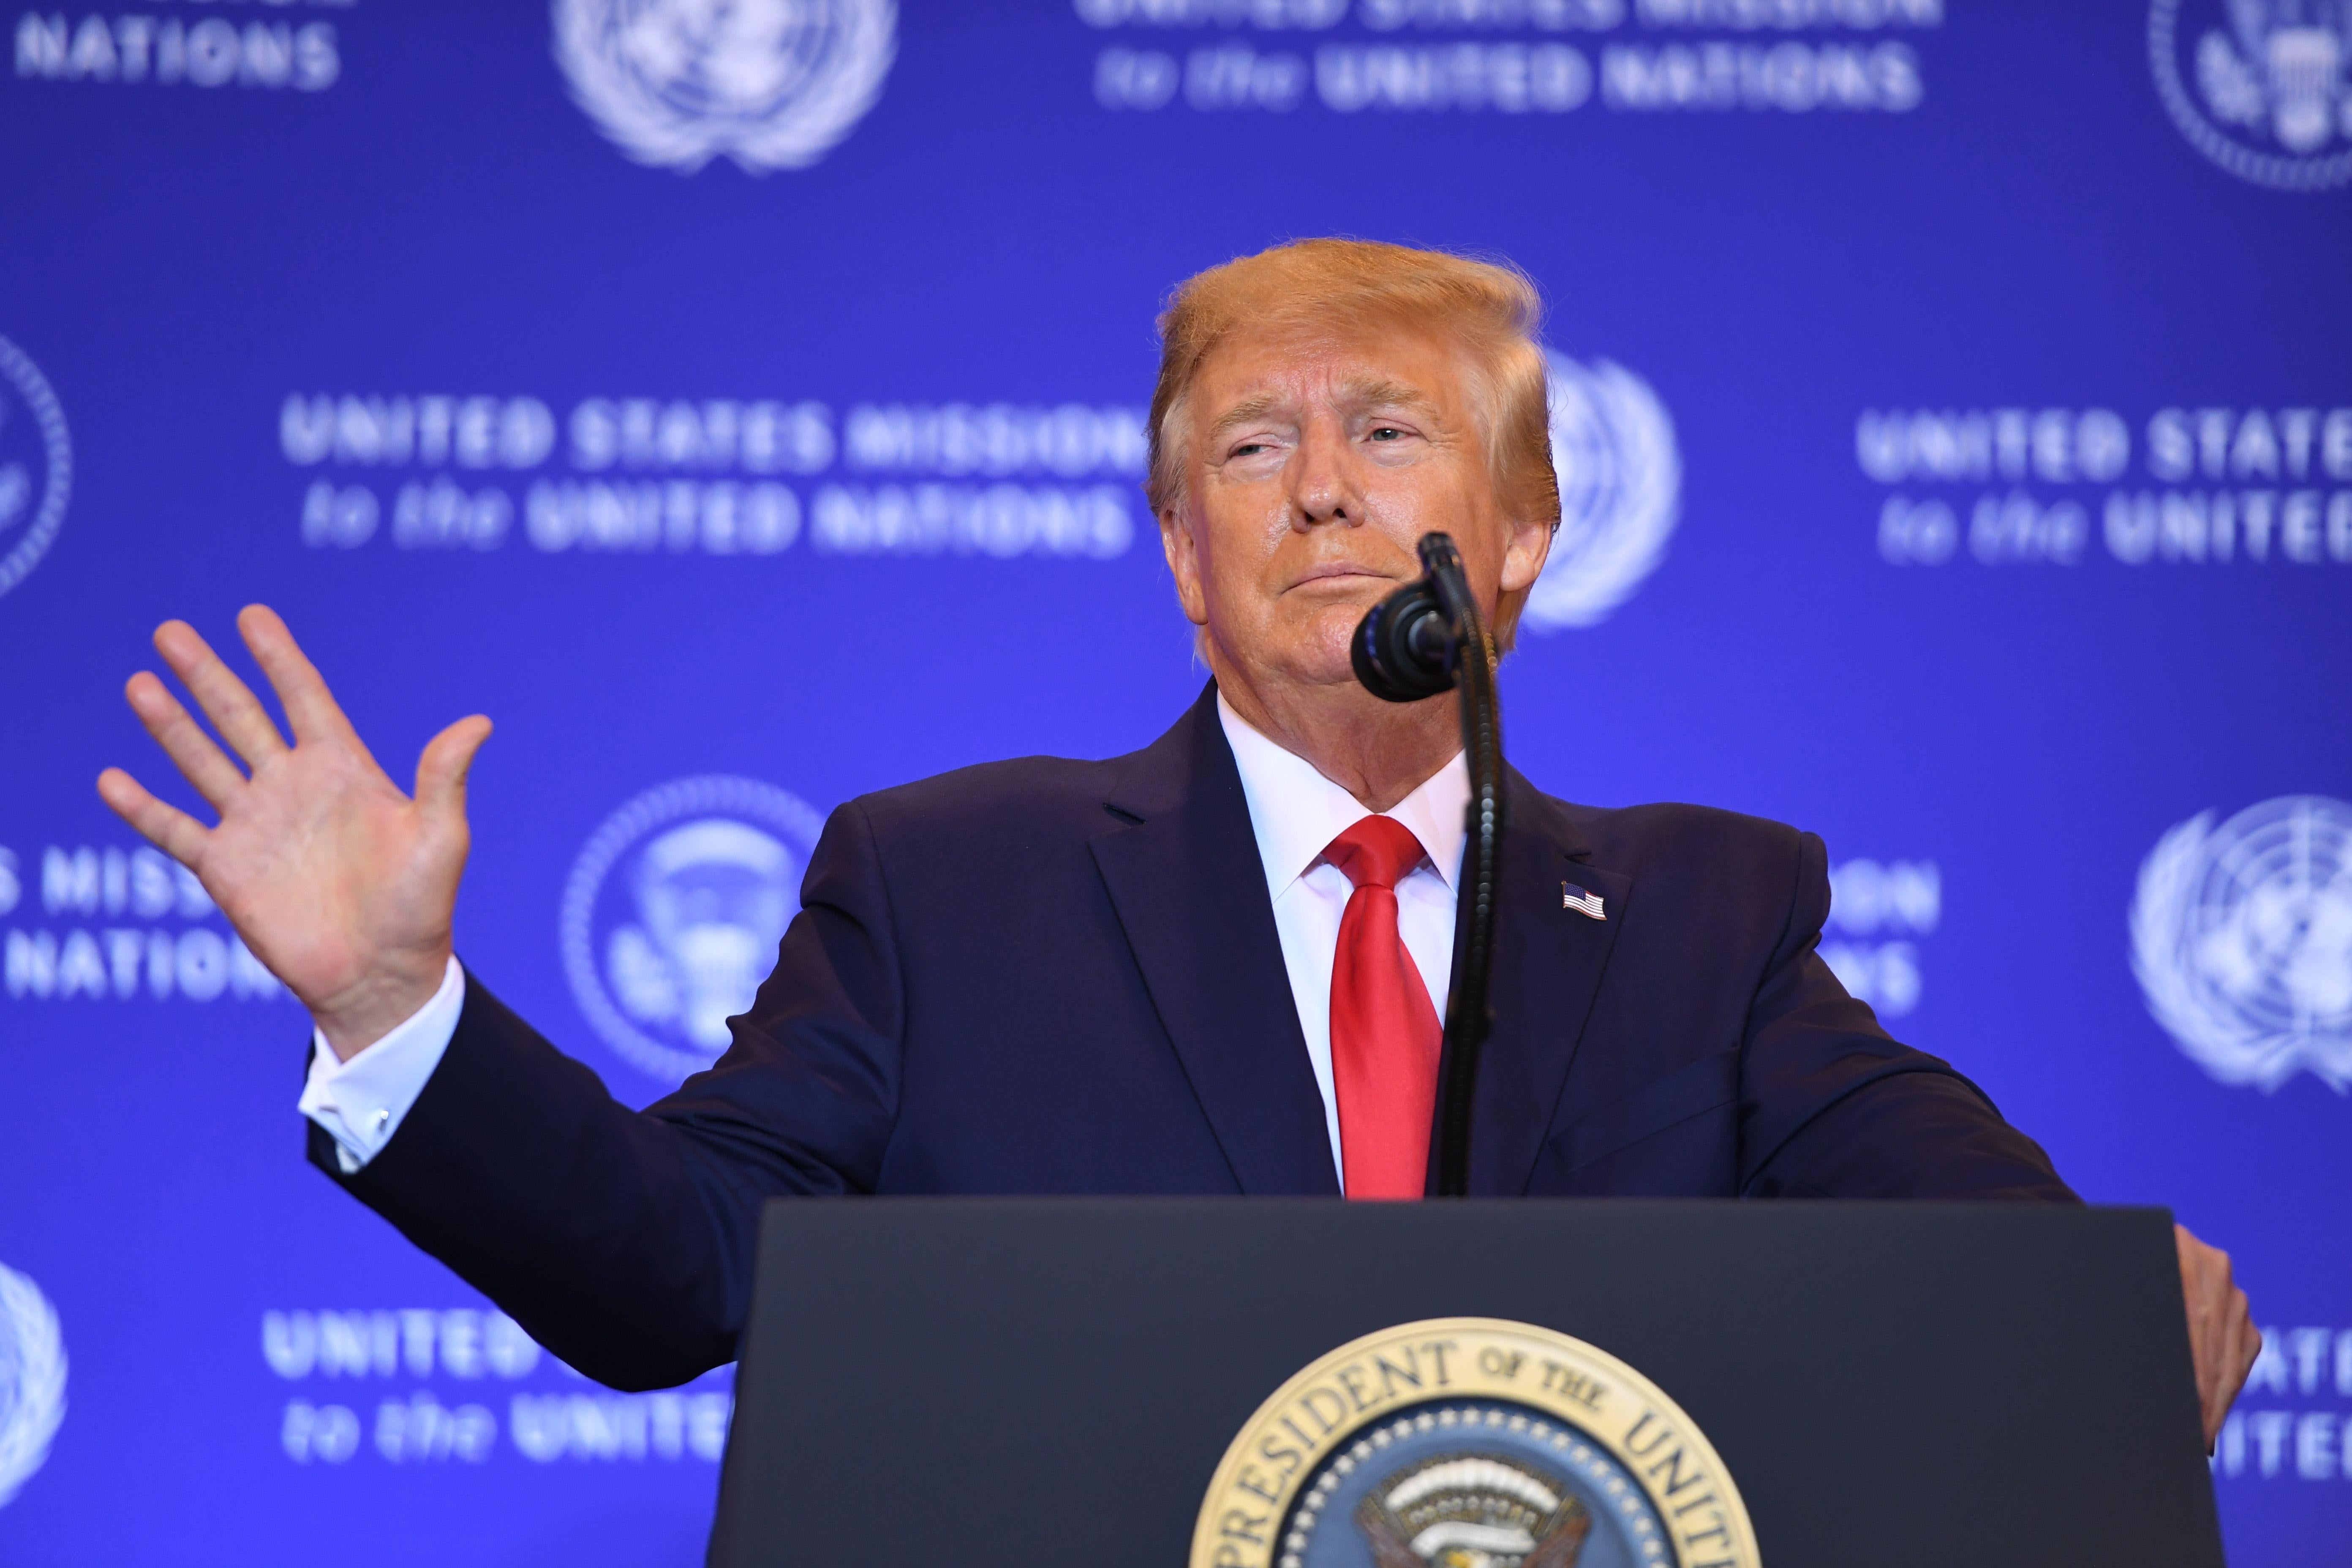 President Trump speaks on the sidelines of the United Nations General Assembly in New York on Sept. 25, 2019.